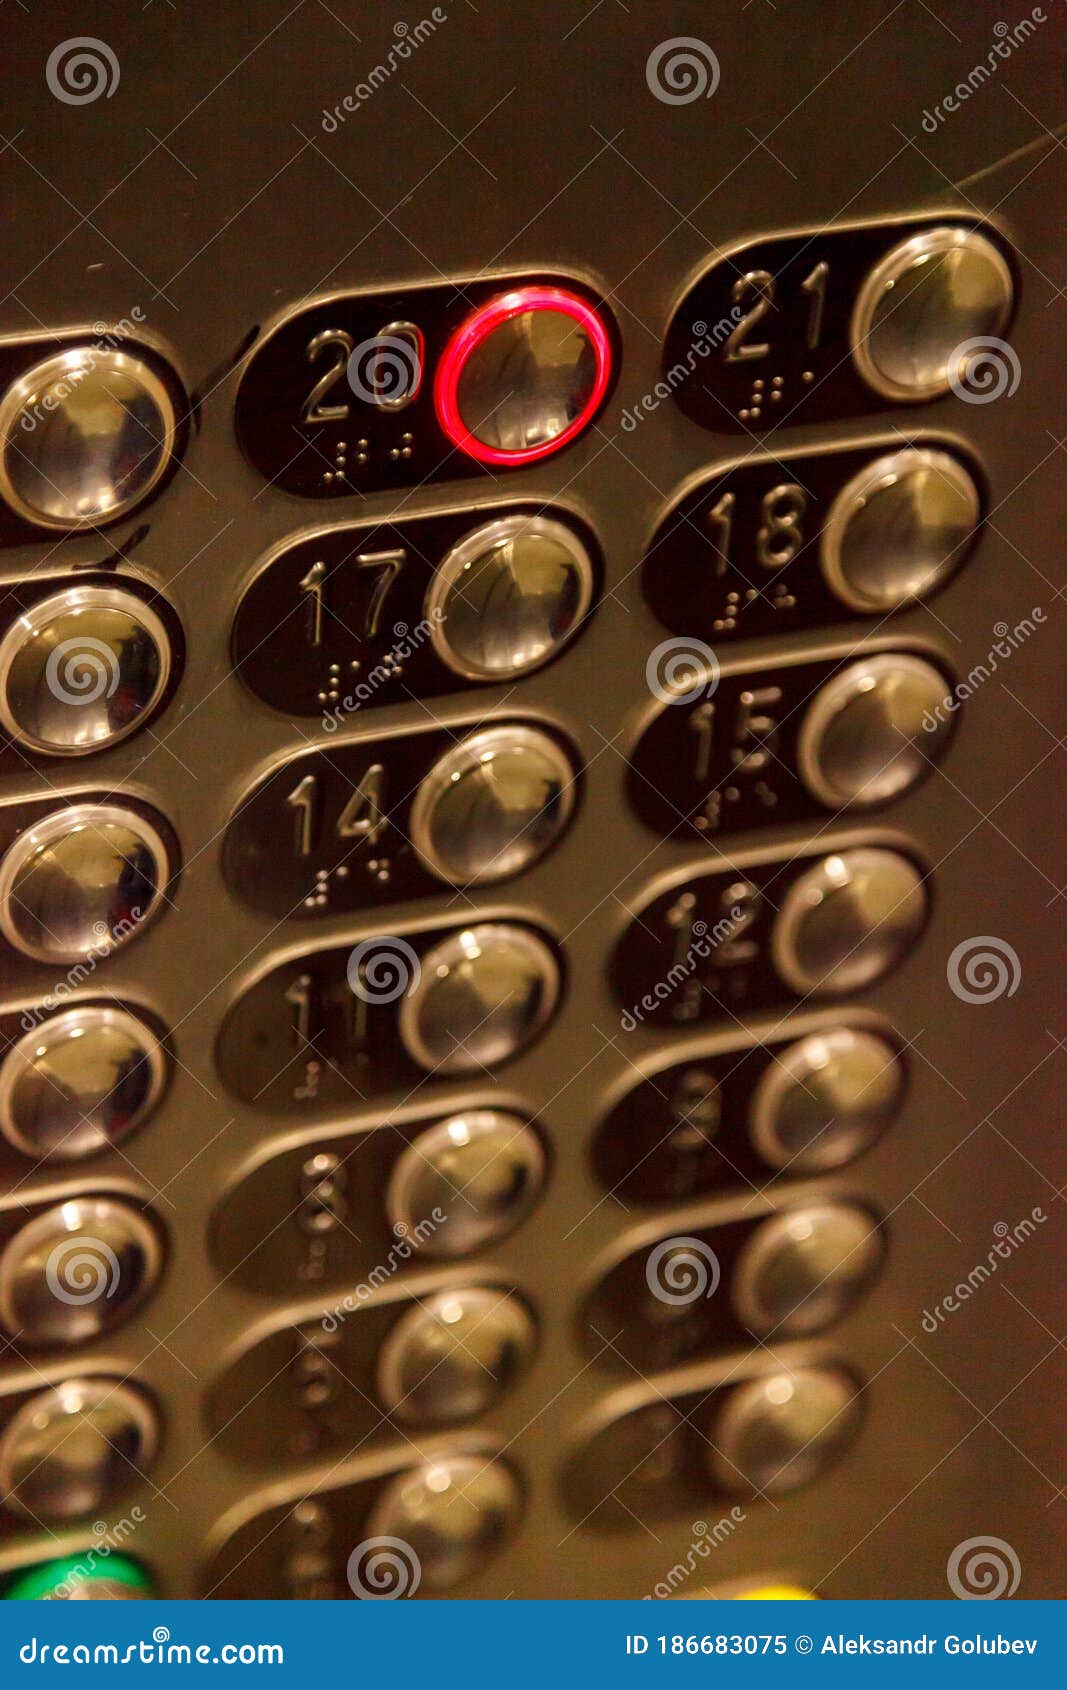 elevator buttons with the number 20 enabled